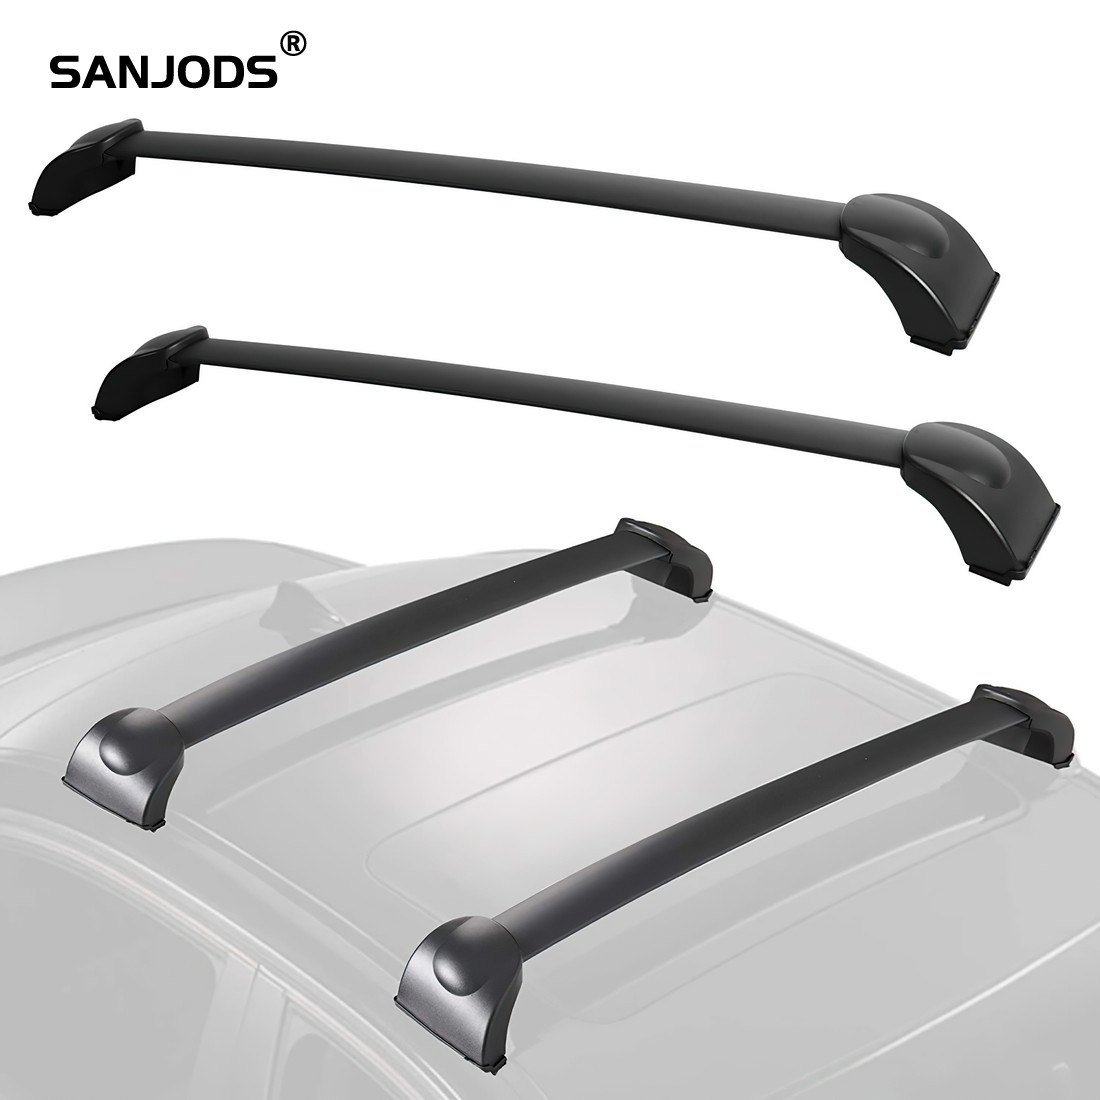 SANJODS Car Roof Rack for Mazda CX-7 CX7 2007 2008 2009 2010 2011 2012 OE Style Aluminum Roof Rail Cross Bar Baggage Carrier